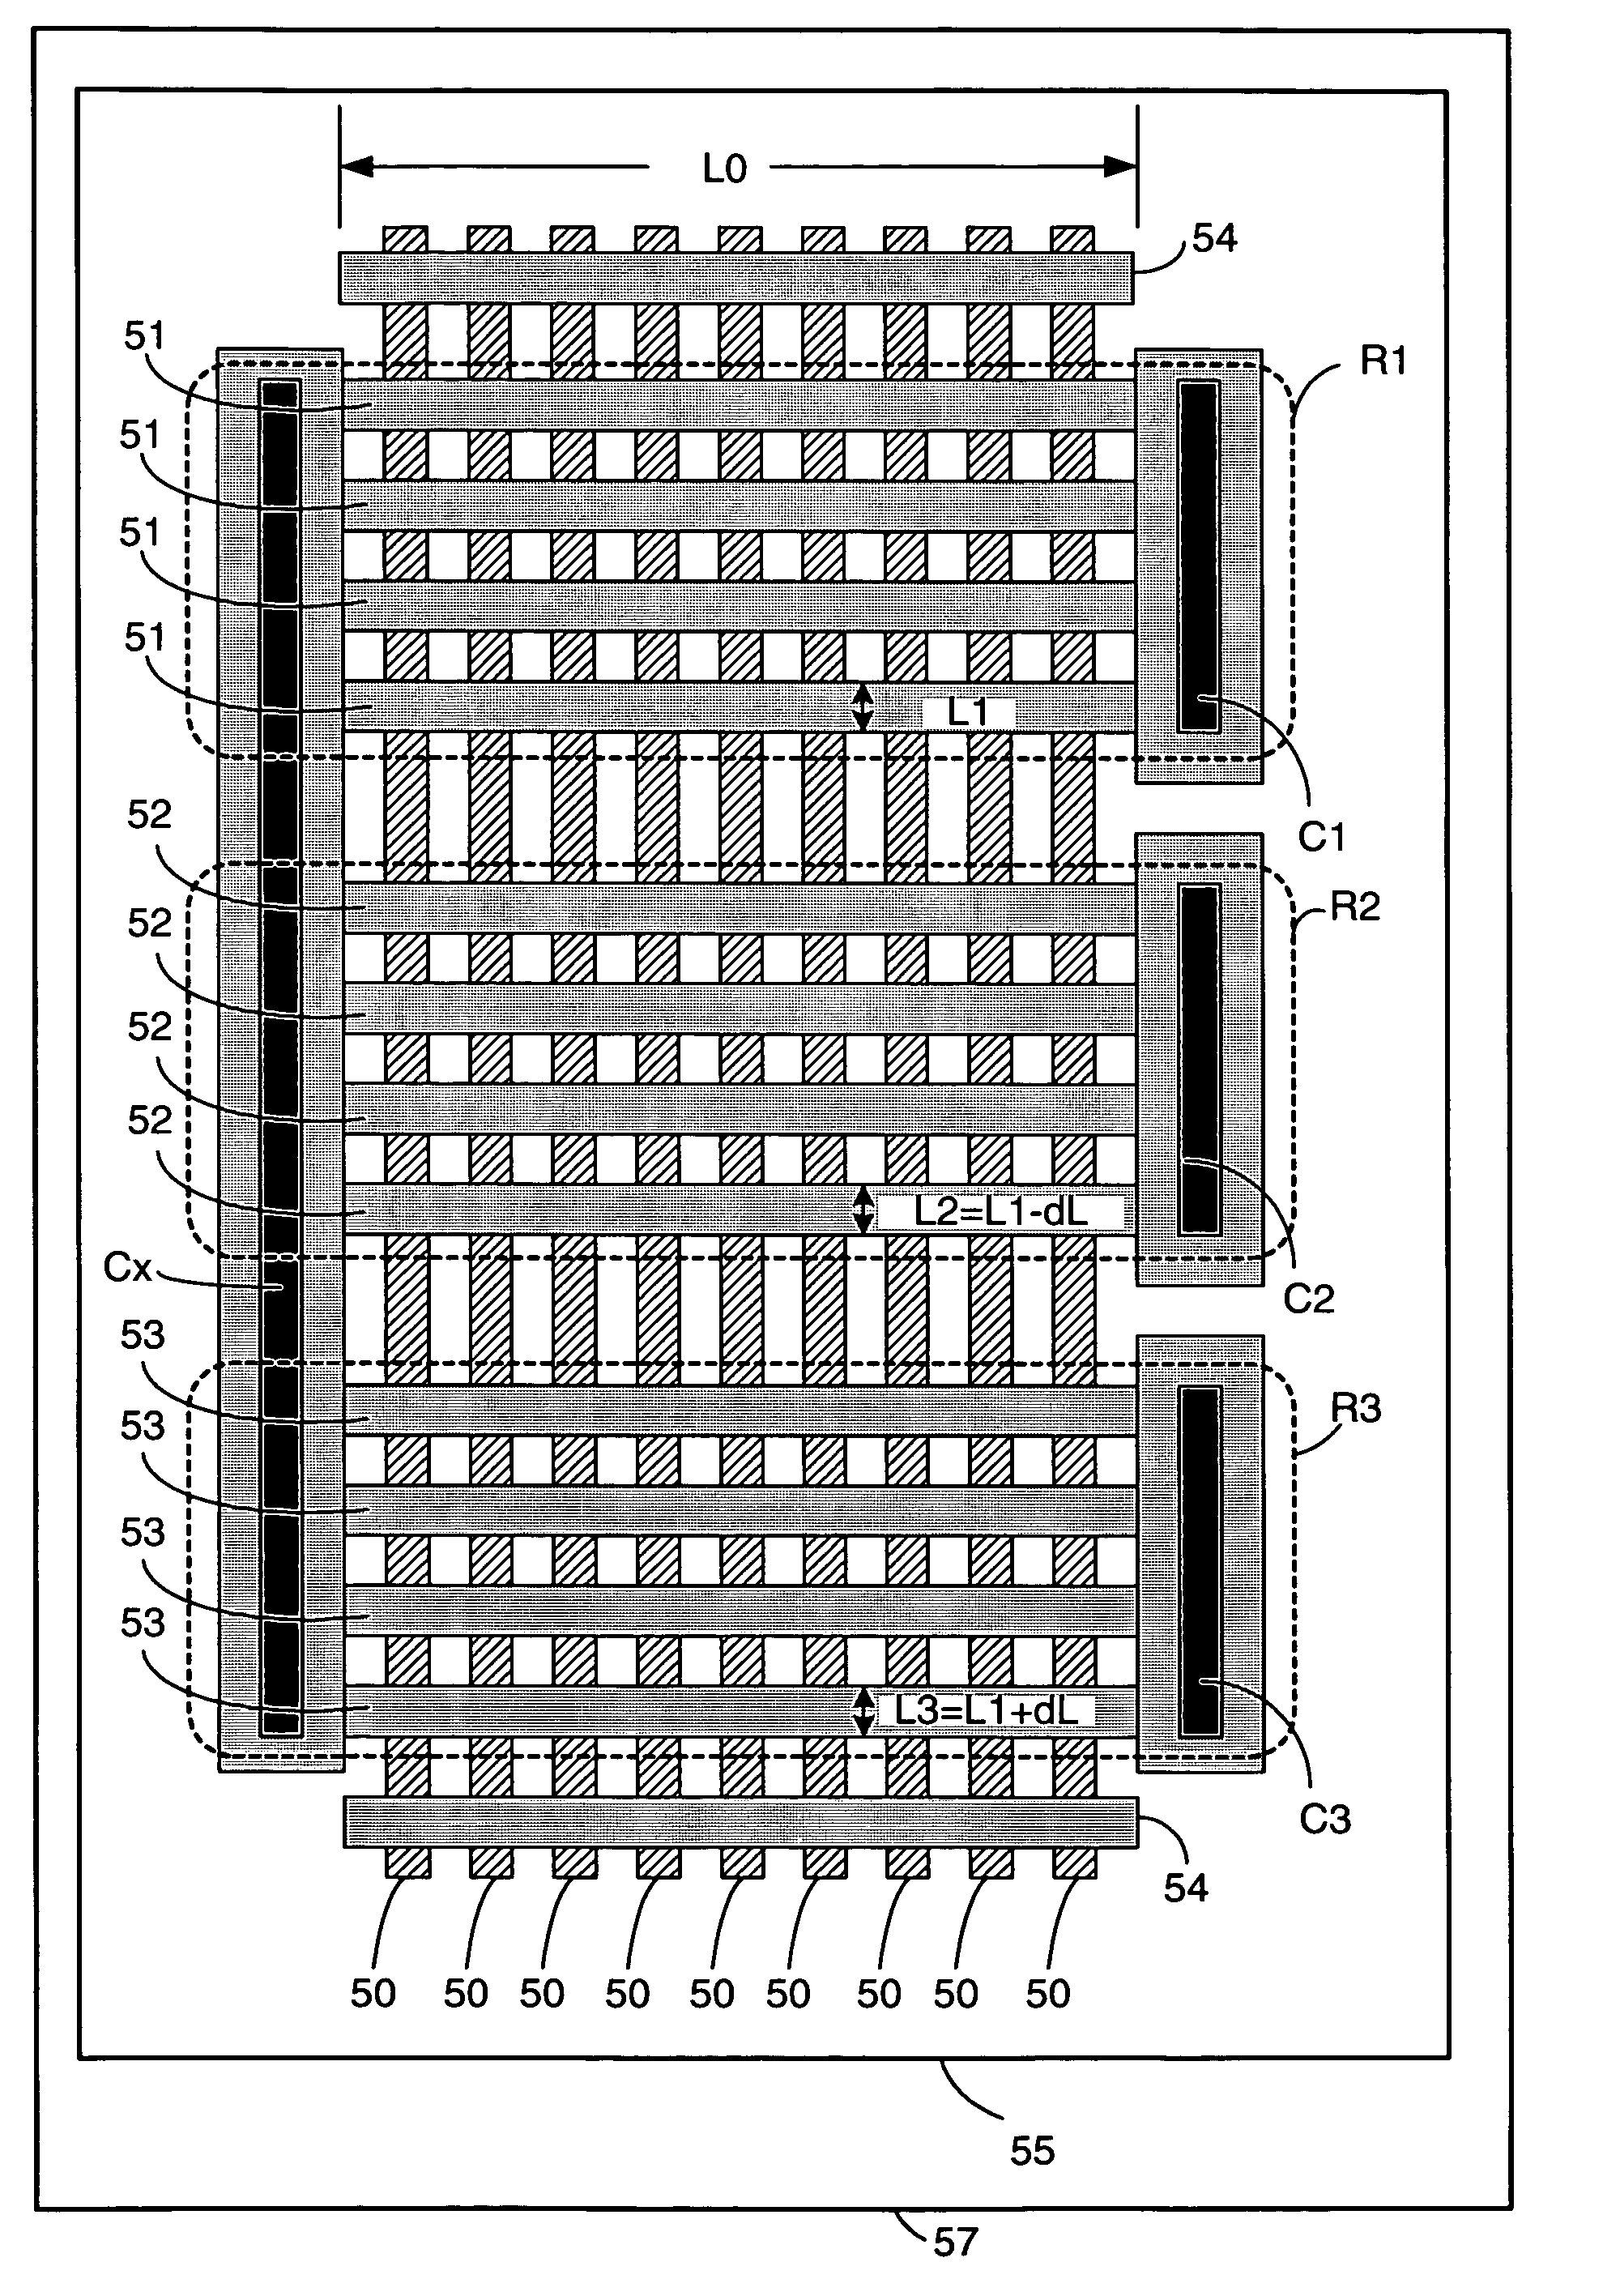 Polysilicon conductor width measurement for 3-dimensional FETs